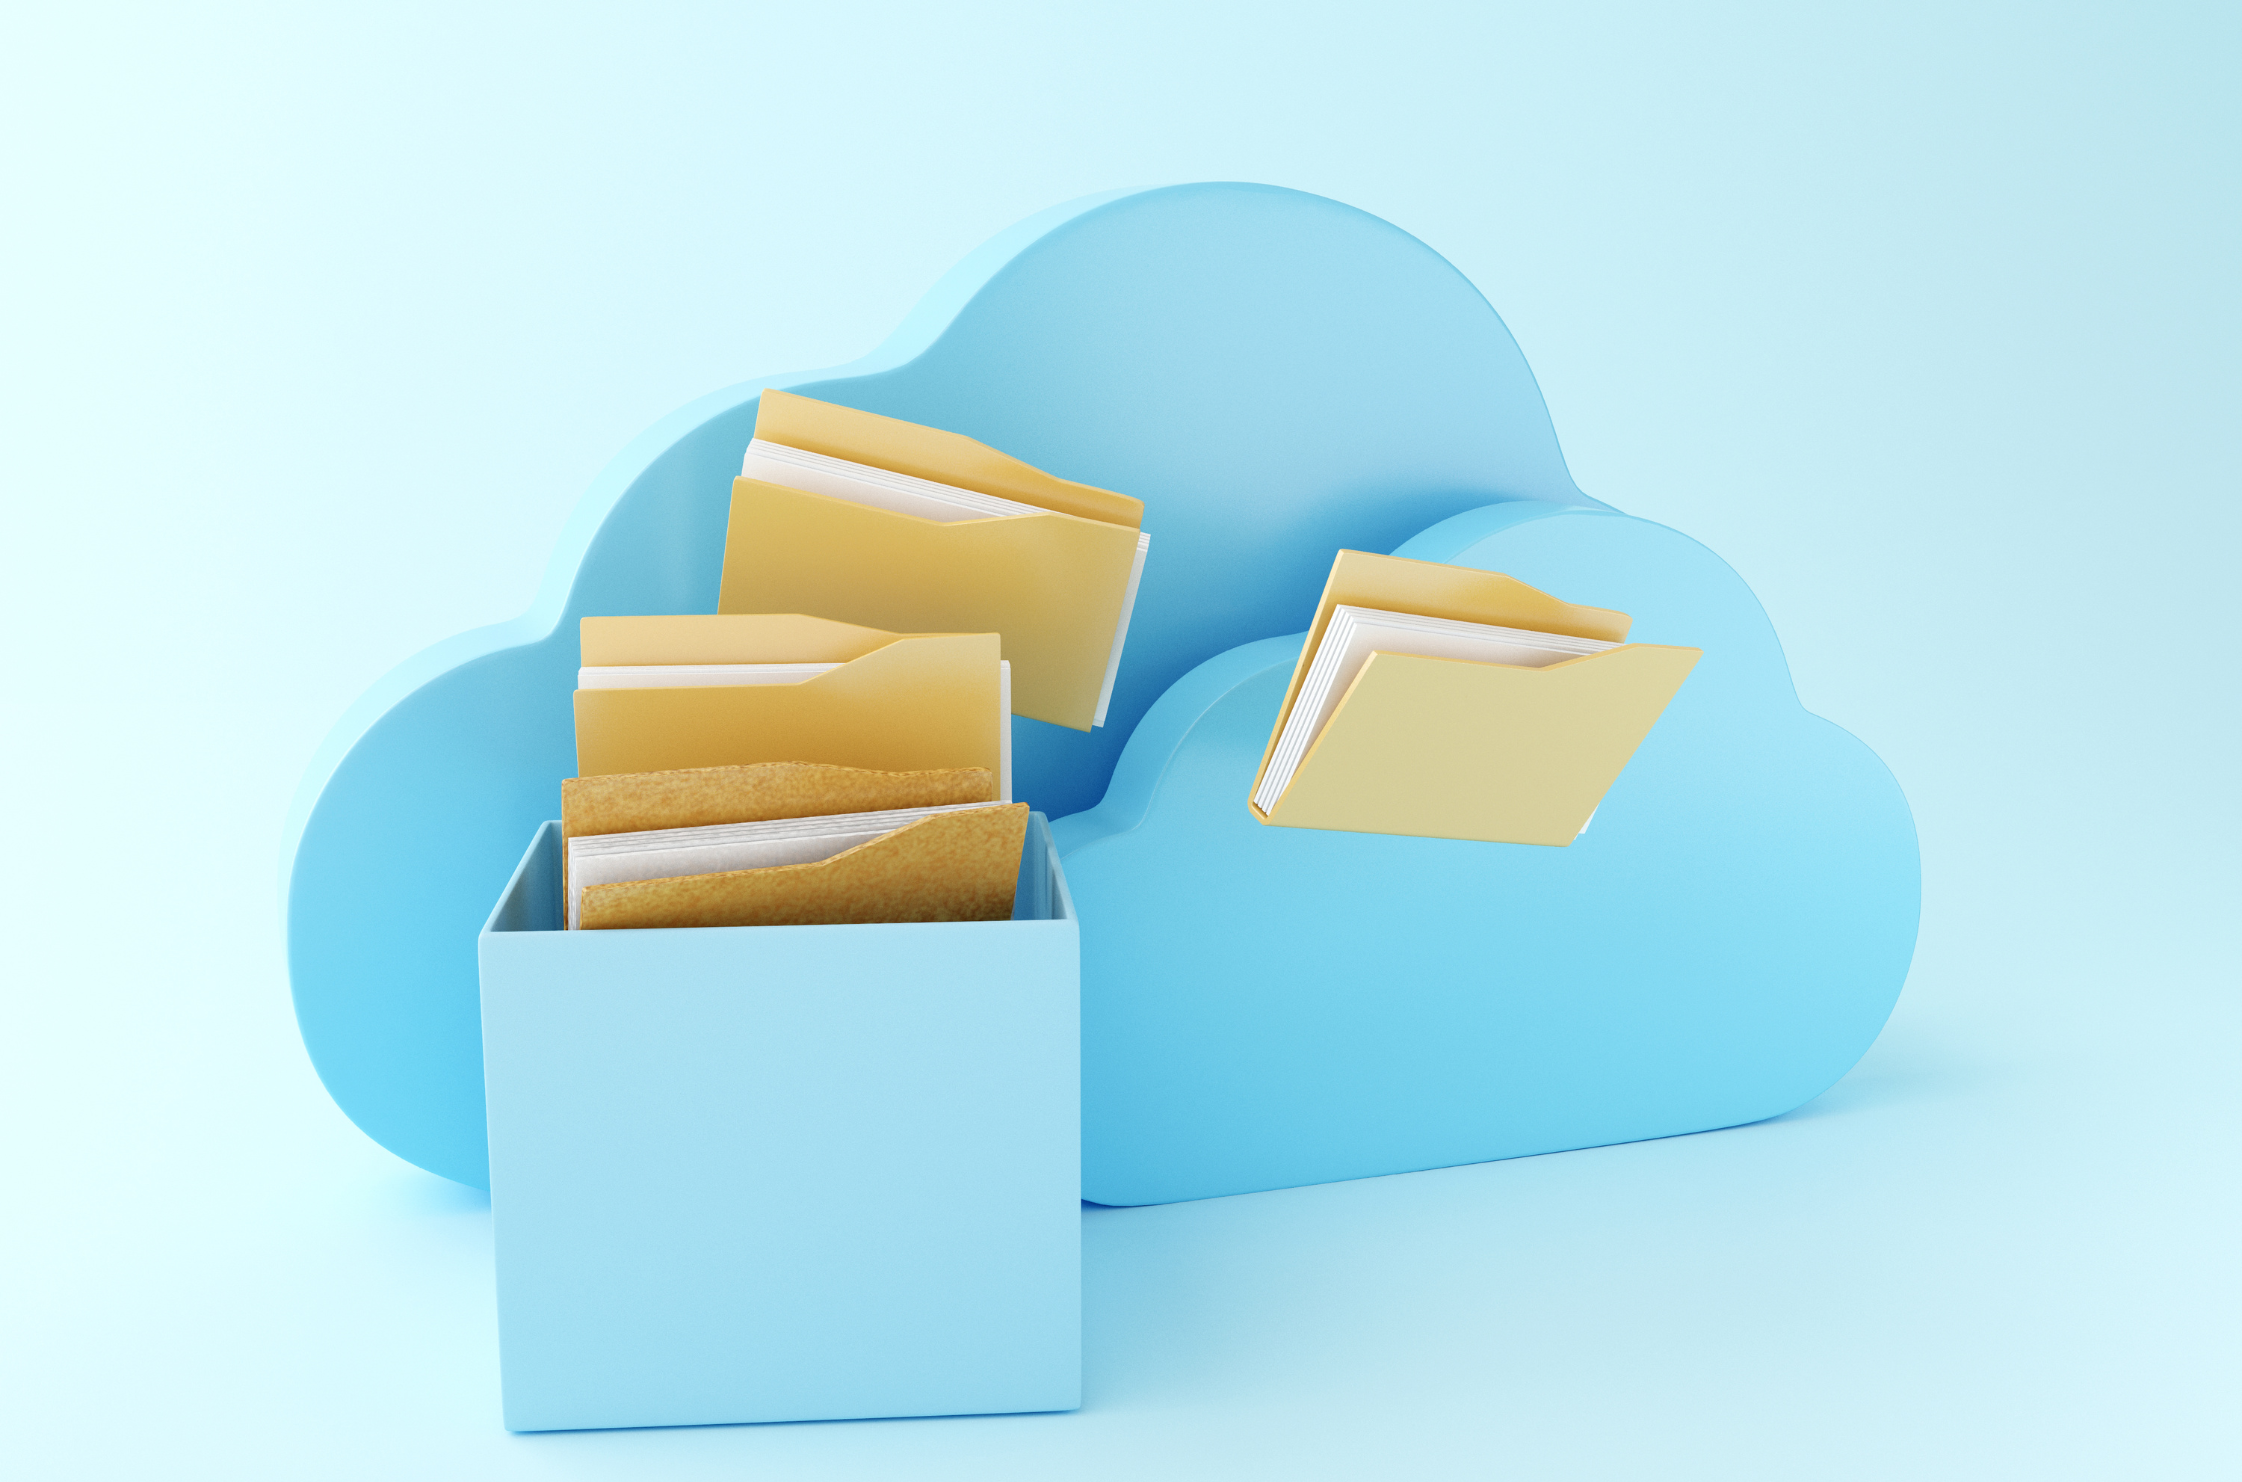 Yellow file folders attached to a blue cloud represent moving from hard files to a cloud environment.